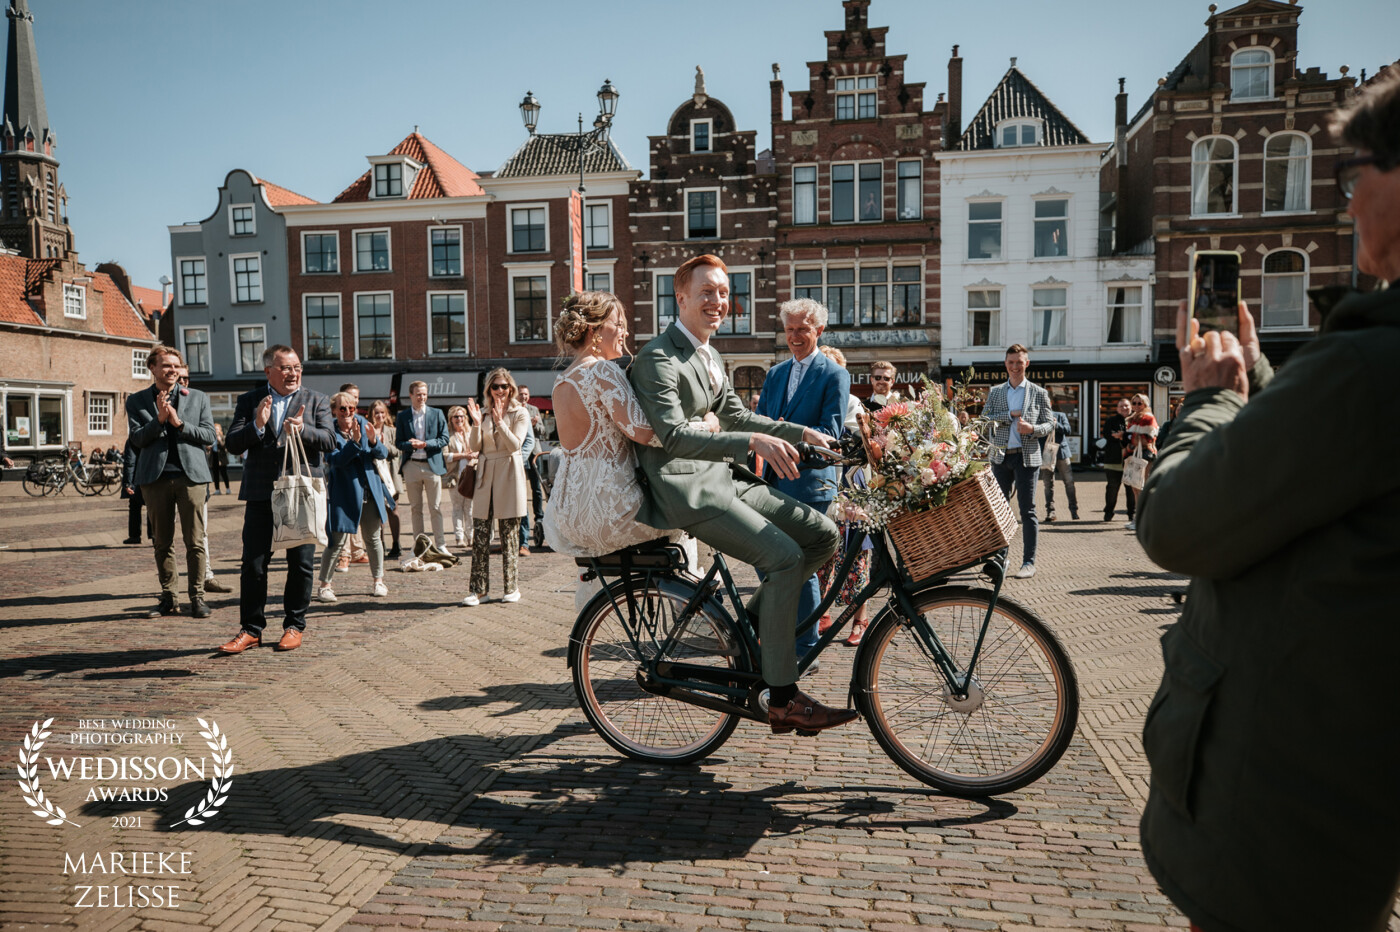 This couple had a city wedding in my own city, Delft. We did everything by bike this day! Normally the couple arrives by car at the city council, but Maaike and Guus made their entry by bike!